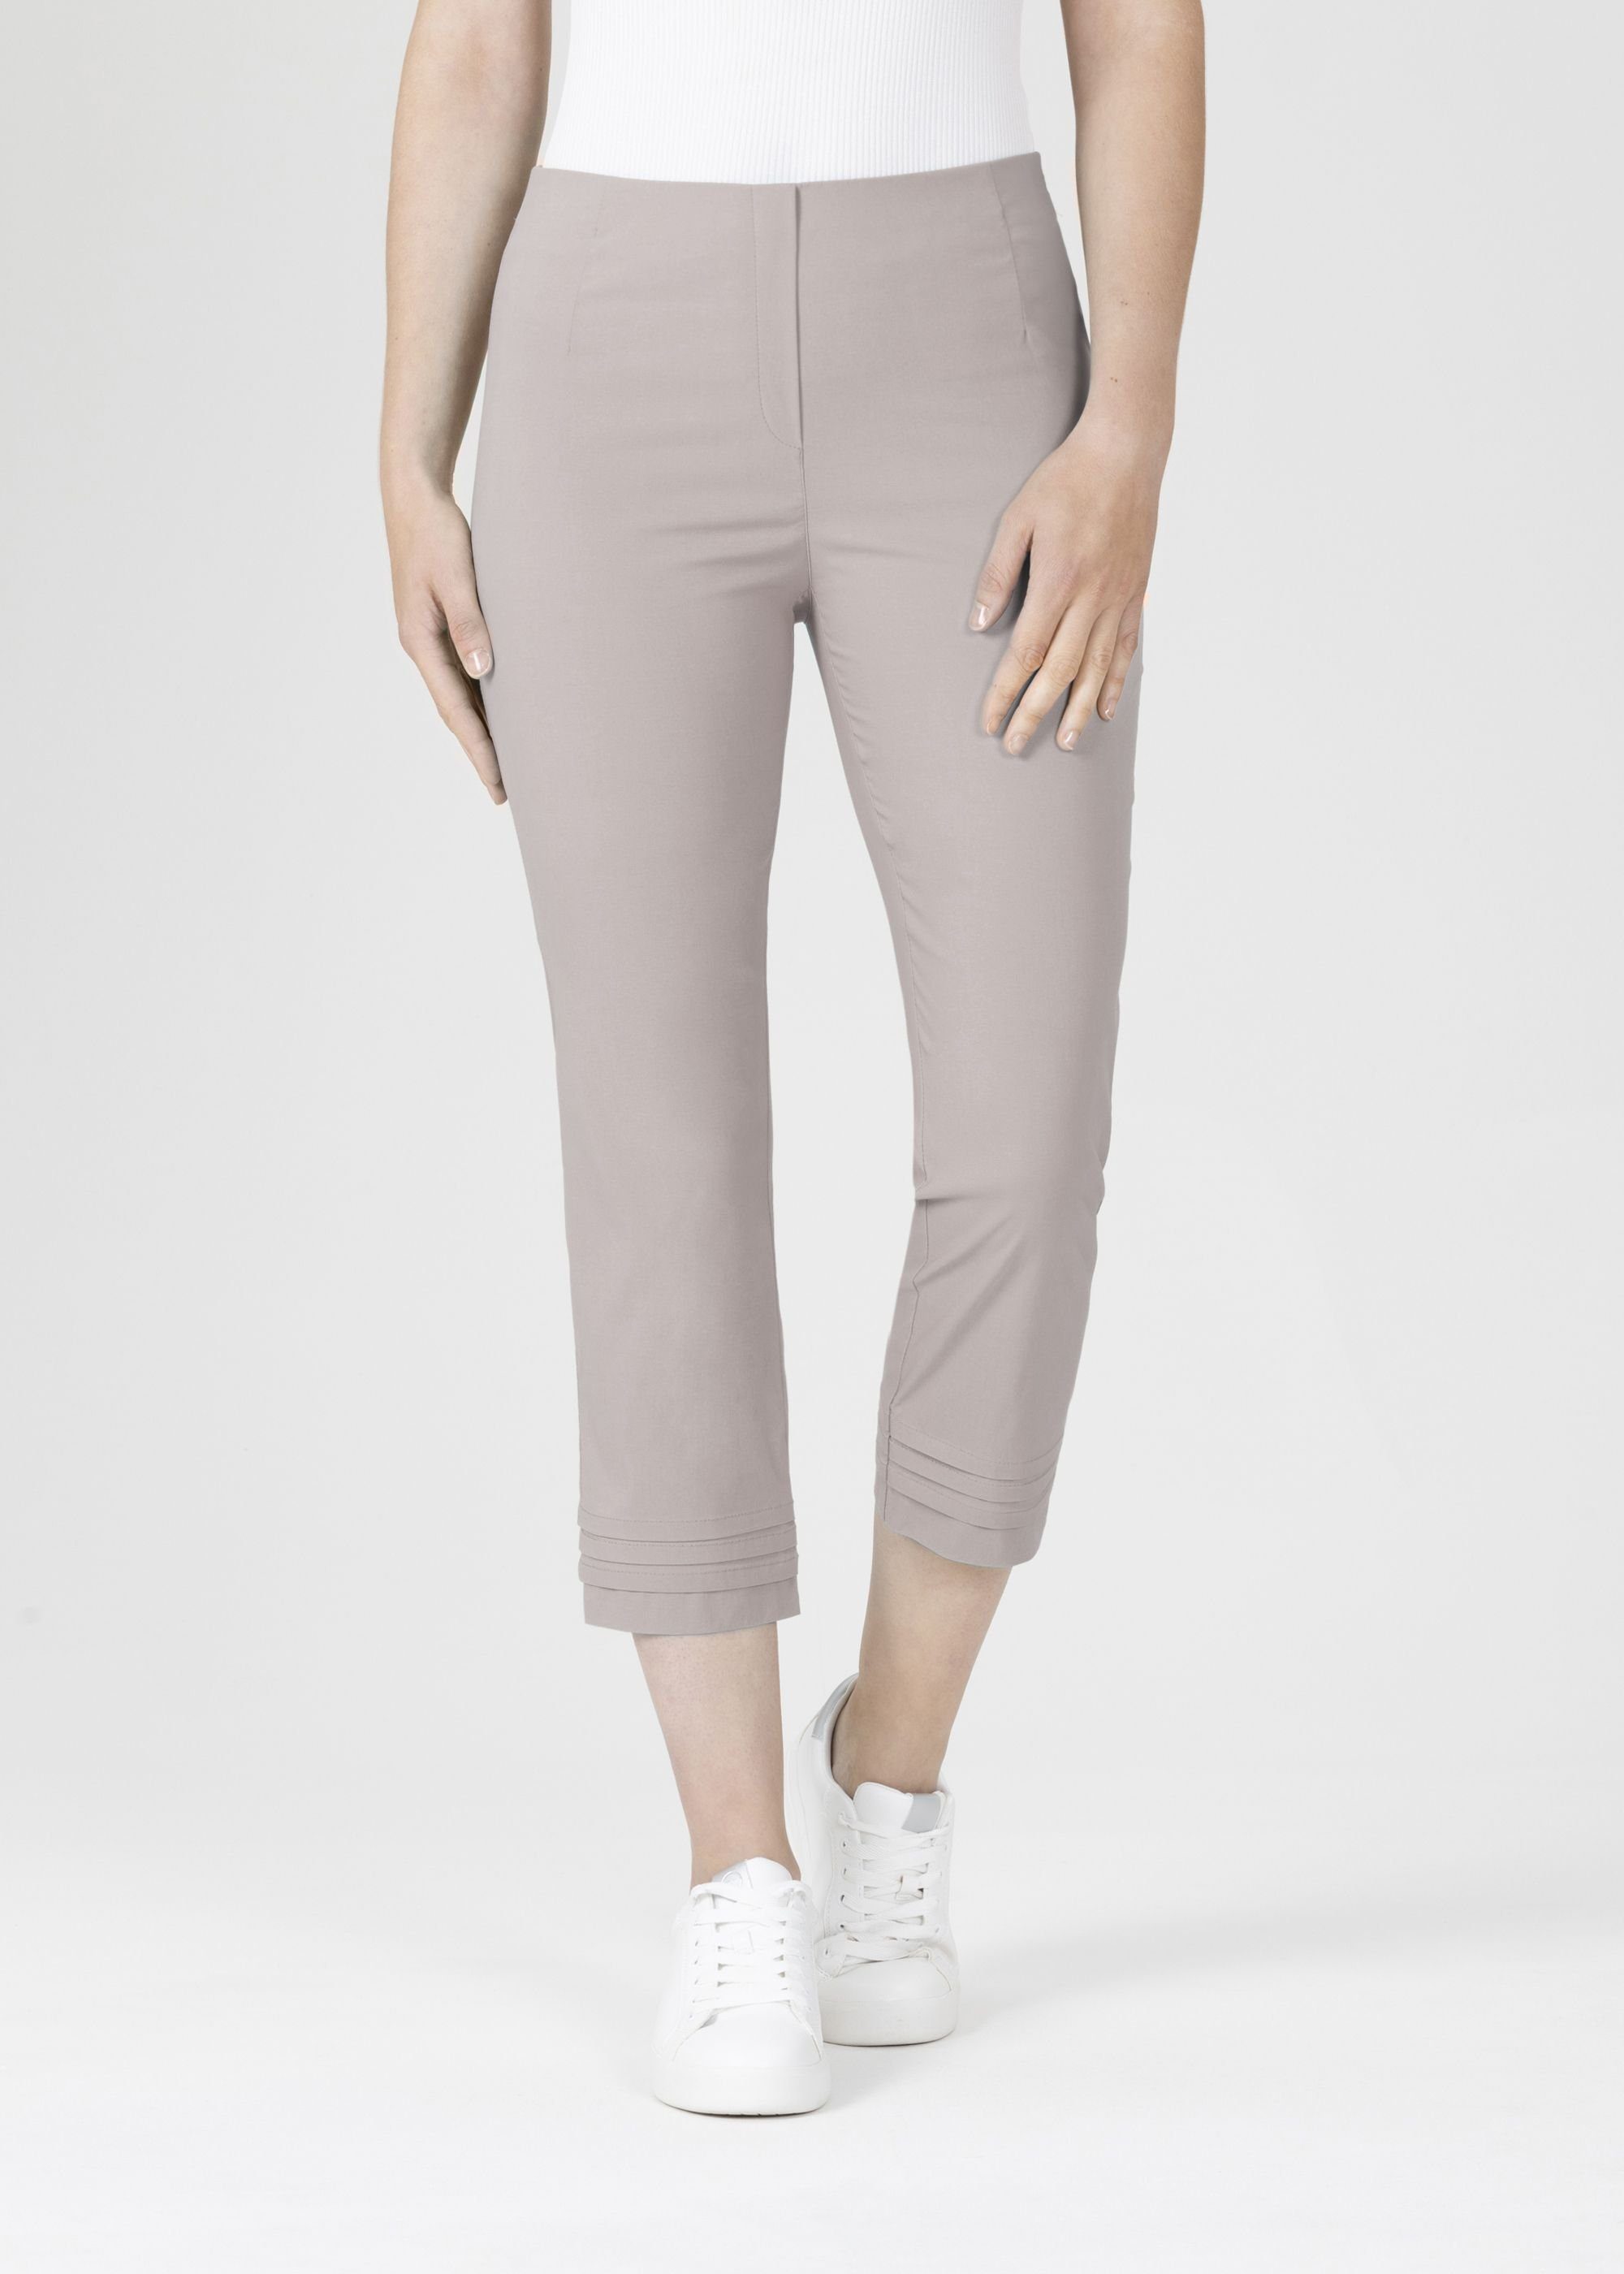 Stehmann Stoffhose simply Ina taupe mit Faltendetails